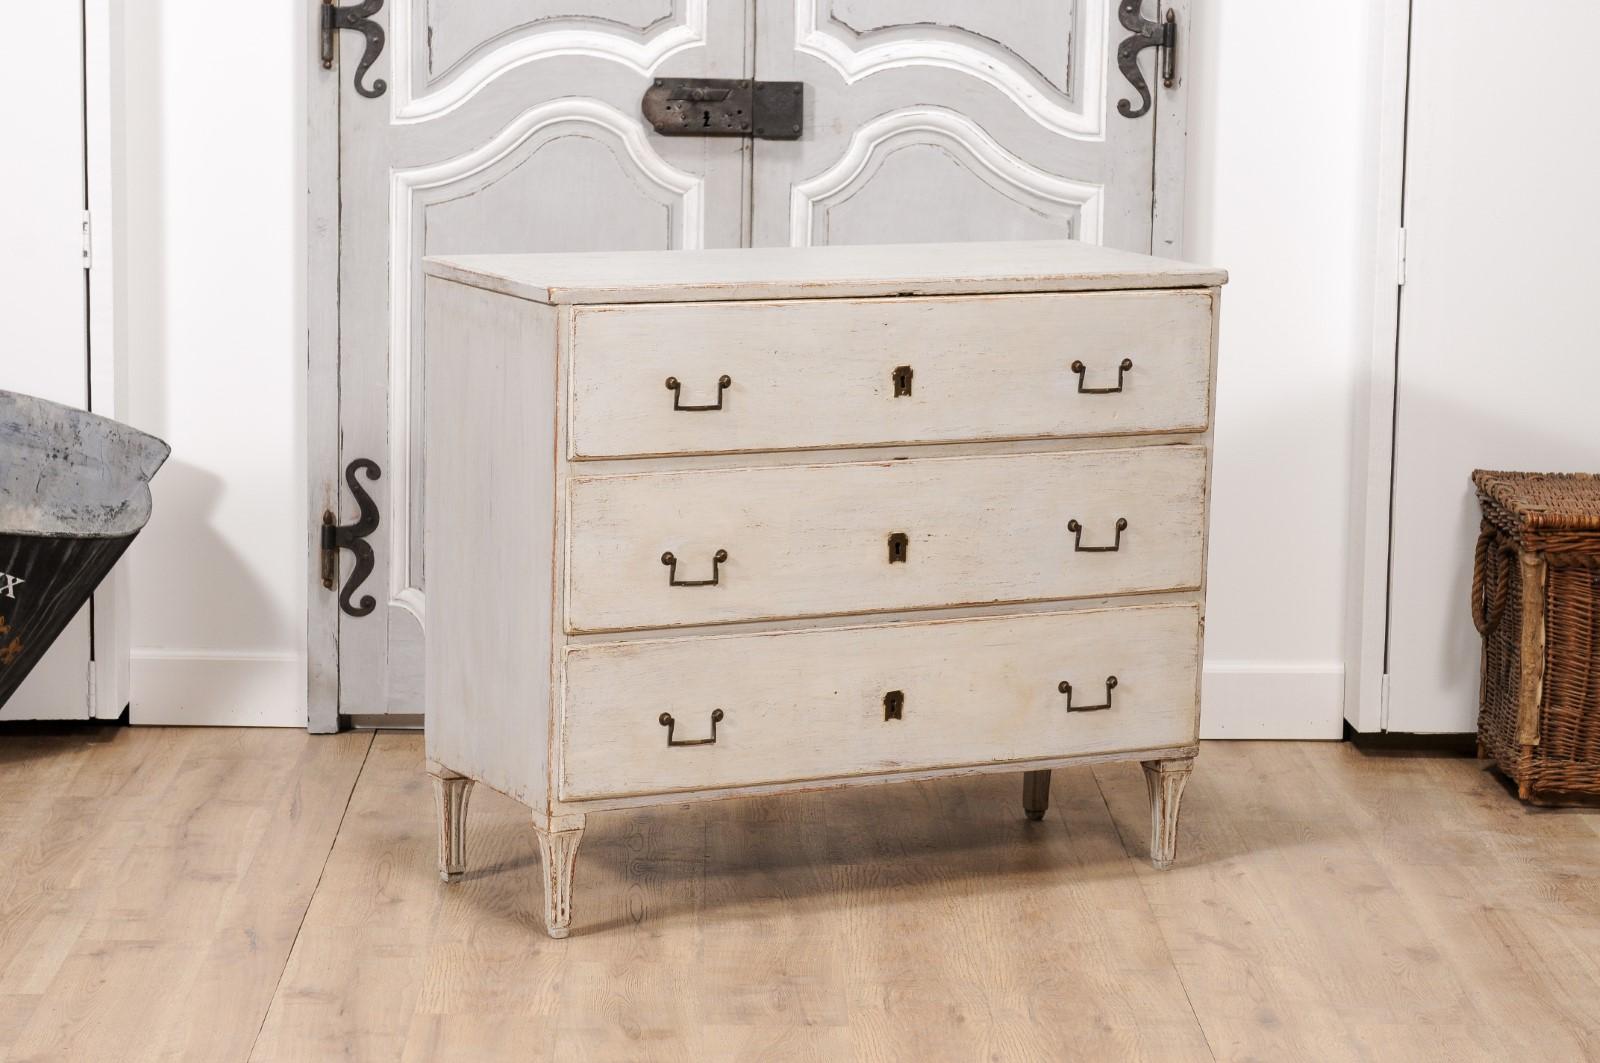 A Swedish Gustavian period painted wood chest from circa 1790 with three drawers, linear hardware and carved fluted feet. Embodying the refined simplicity of the Swedish Gustavian era, this painted wood chest from circa 1790 offers a serene and